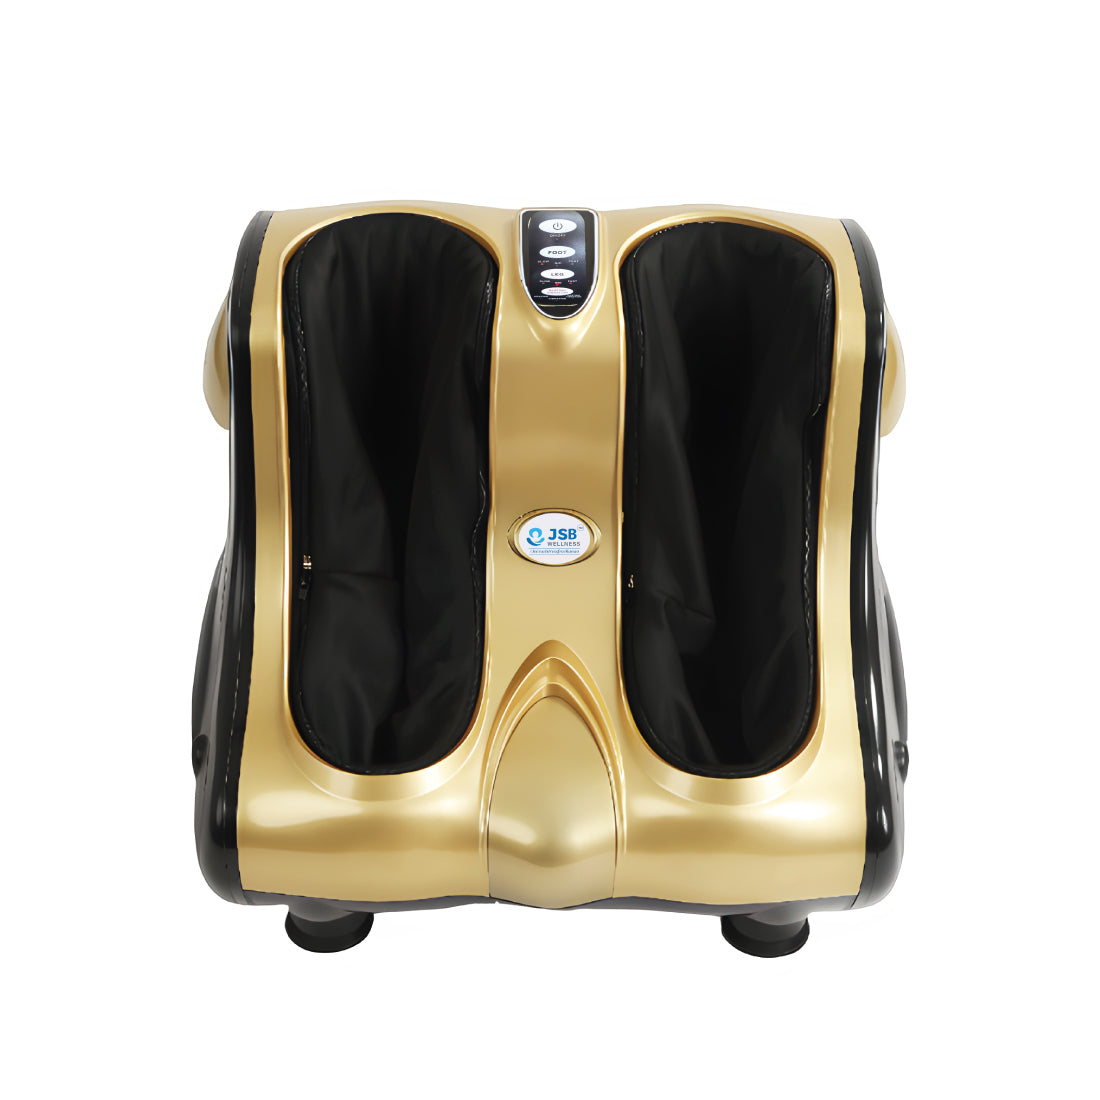 Practical Tips for Safe and Effective Usage of Leg Massager